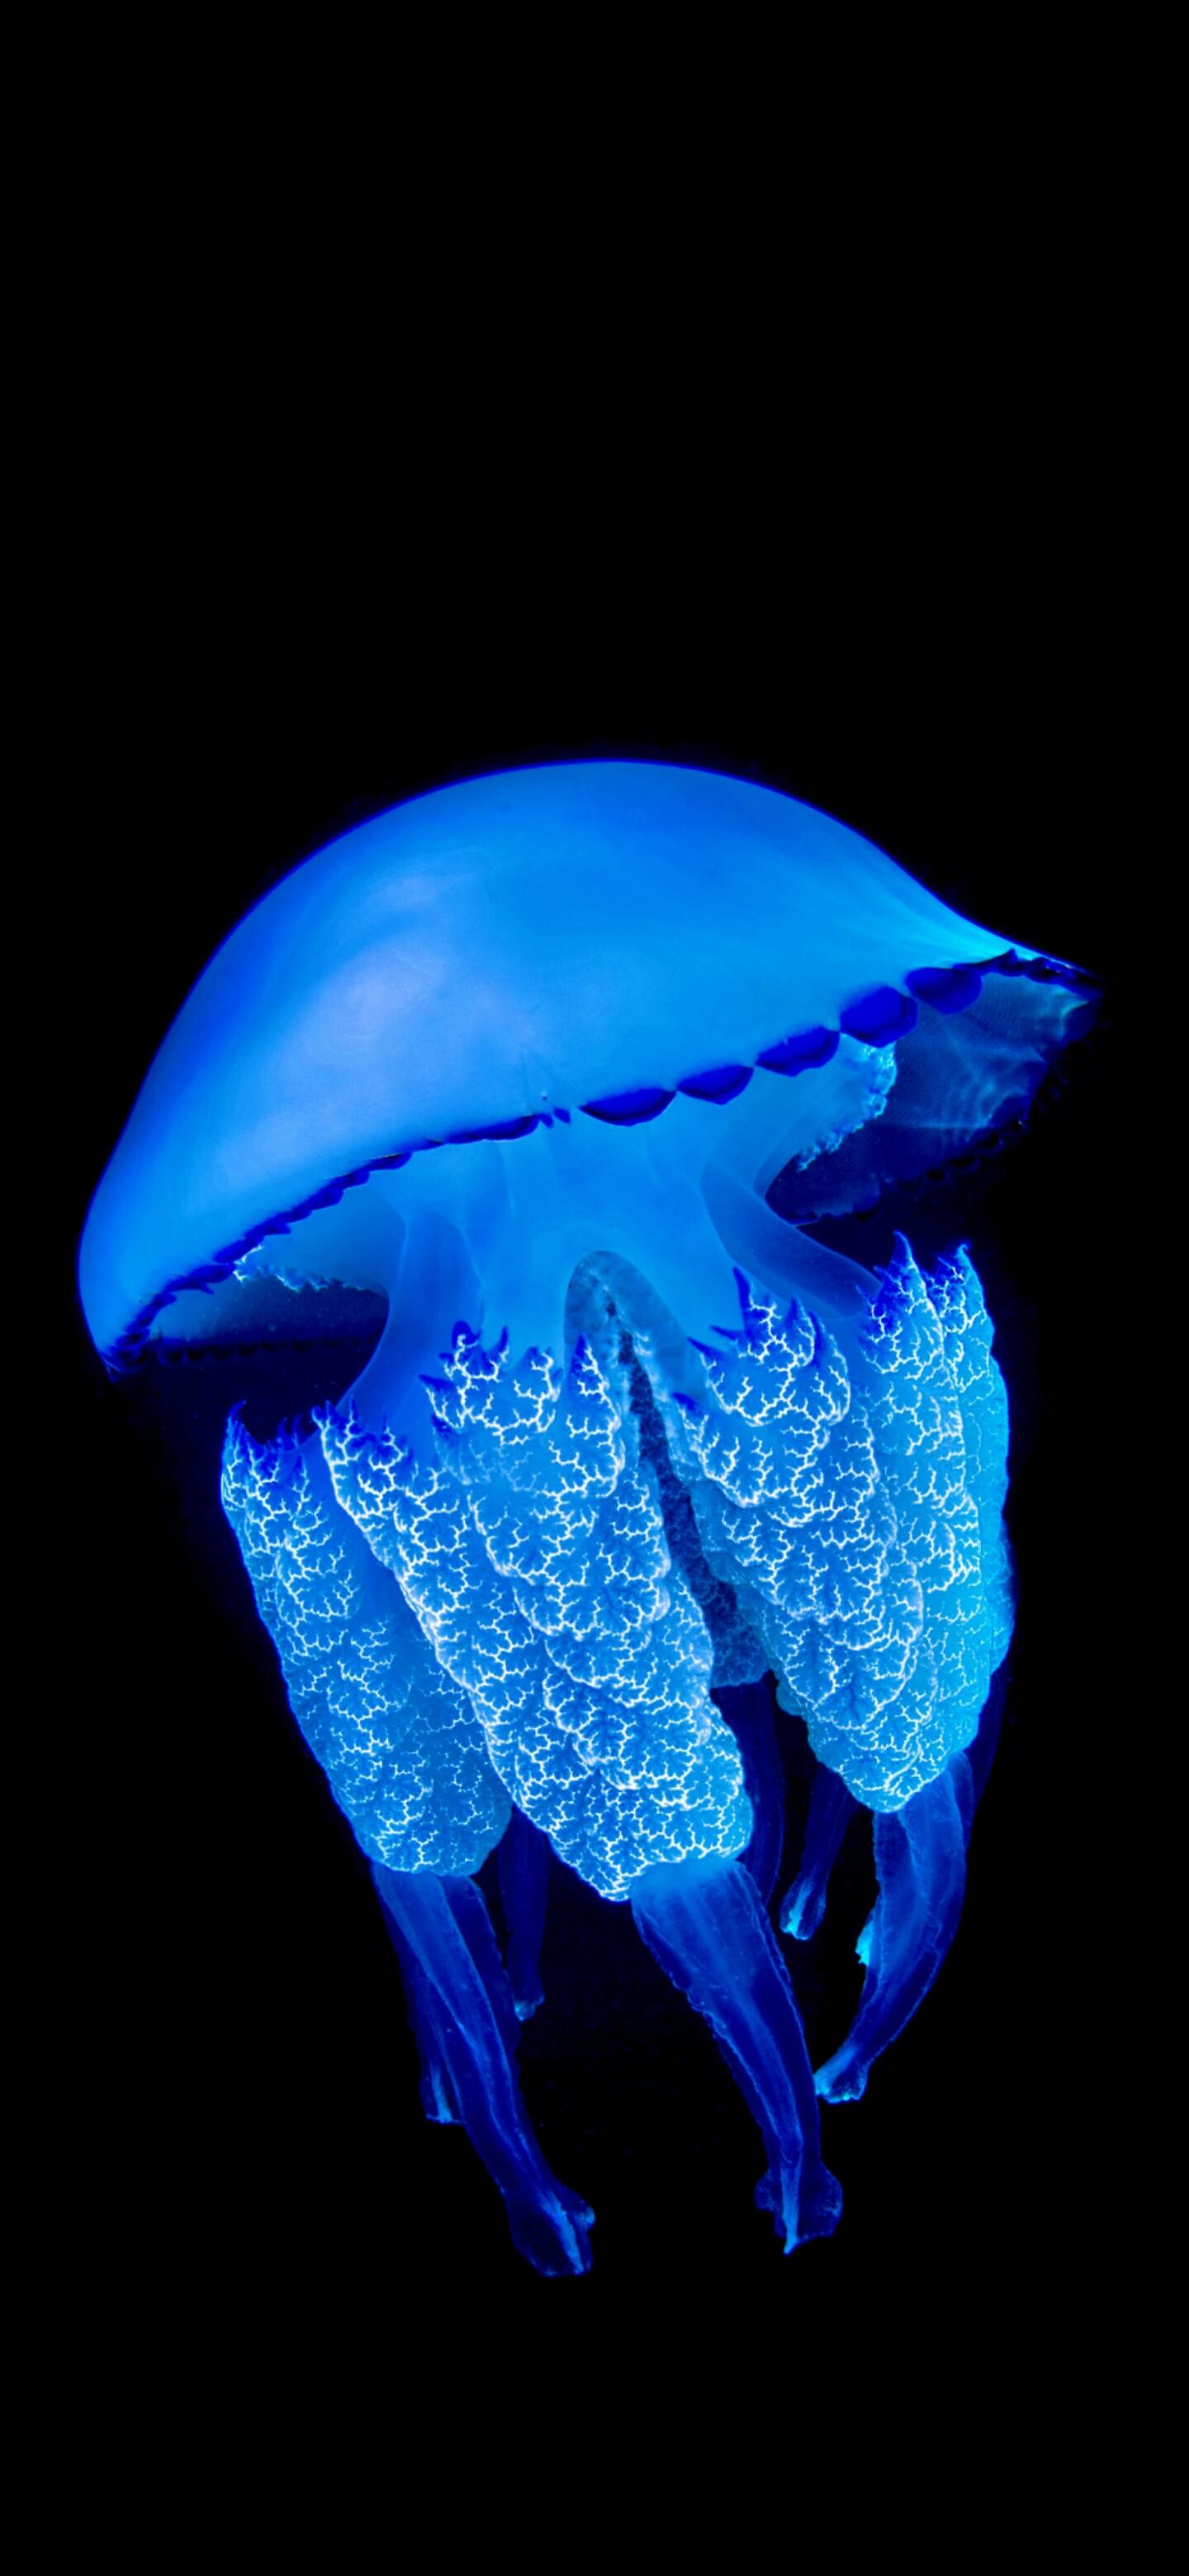 Glowing Jellyfish: Sea jellies, The most marvelous creatures of earth, The oldest multi-organ animal group. 1440x3120 HD Background.